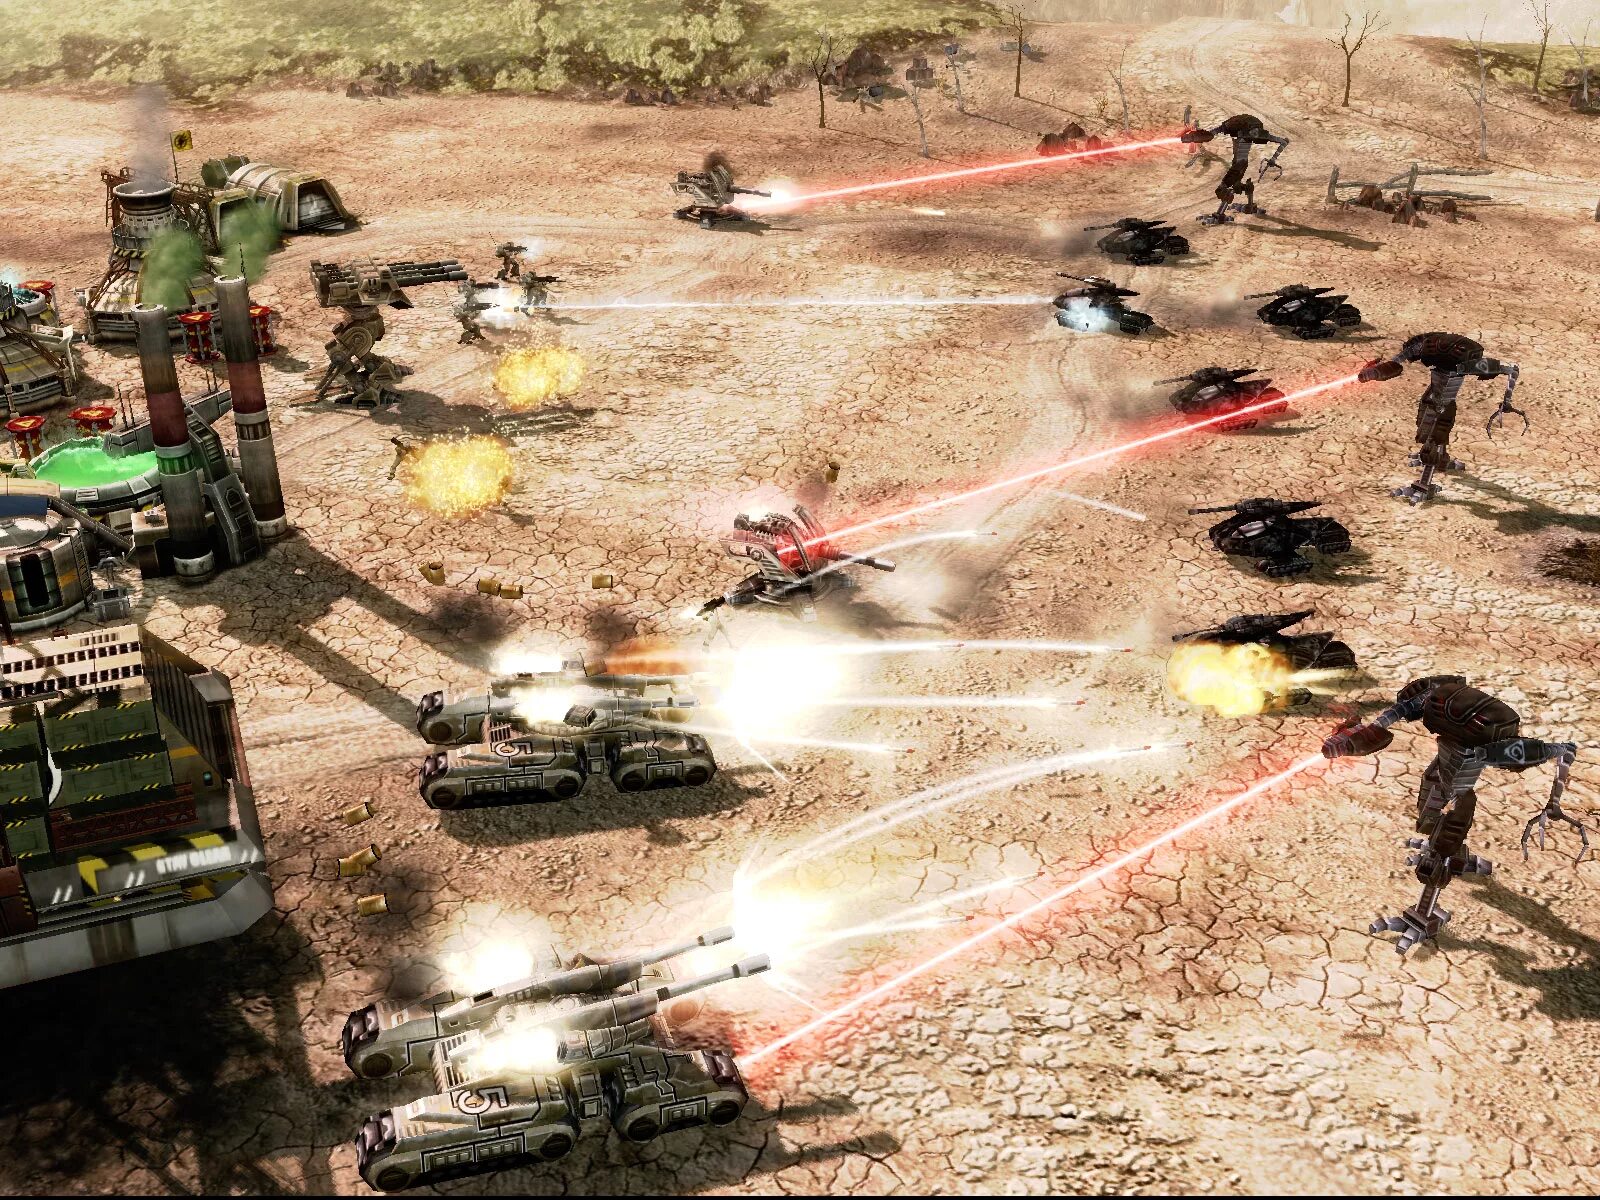 Command & Conquer 3: Tiberium Wars. Command and Conquer Tiberium Wars. CNC 3 Tiberium Wars. Commander Conquer 3 Tiberium Wars. Command conquer на русском